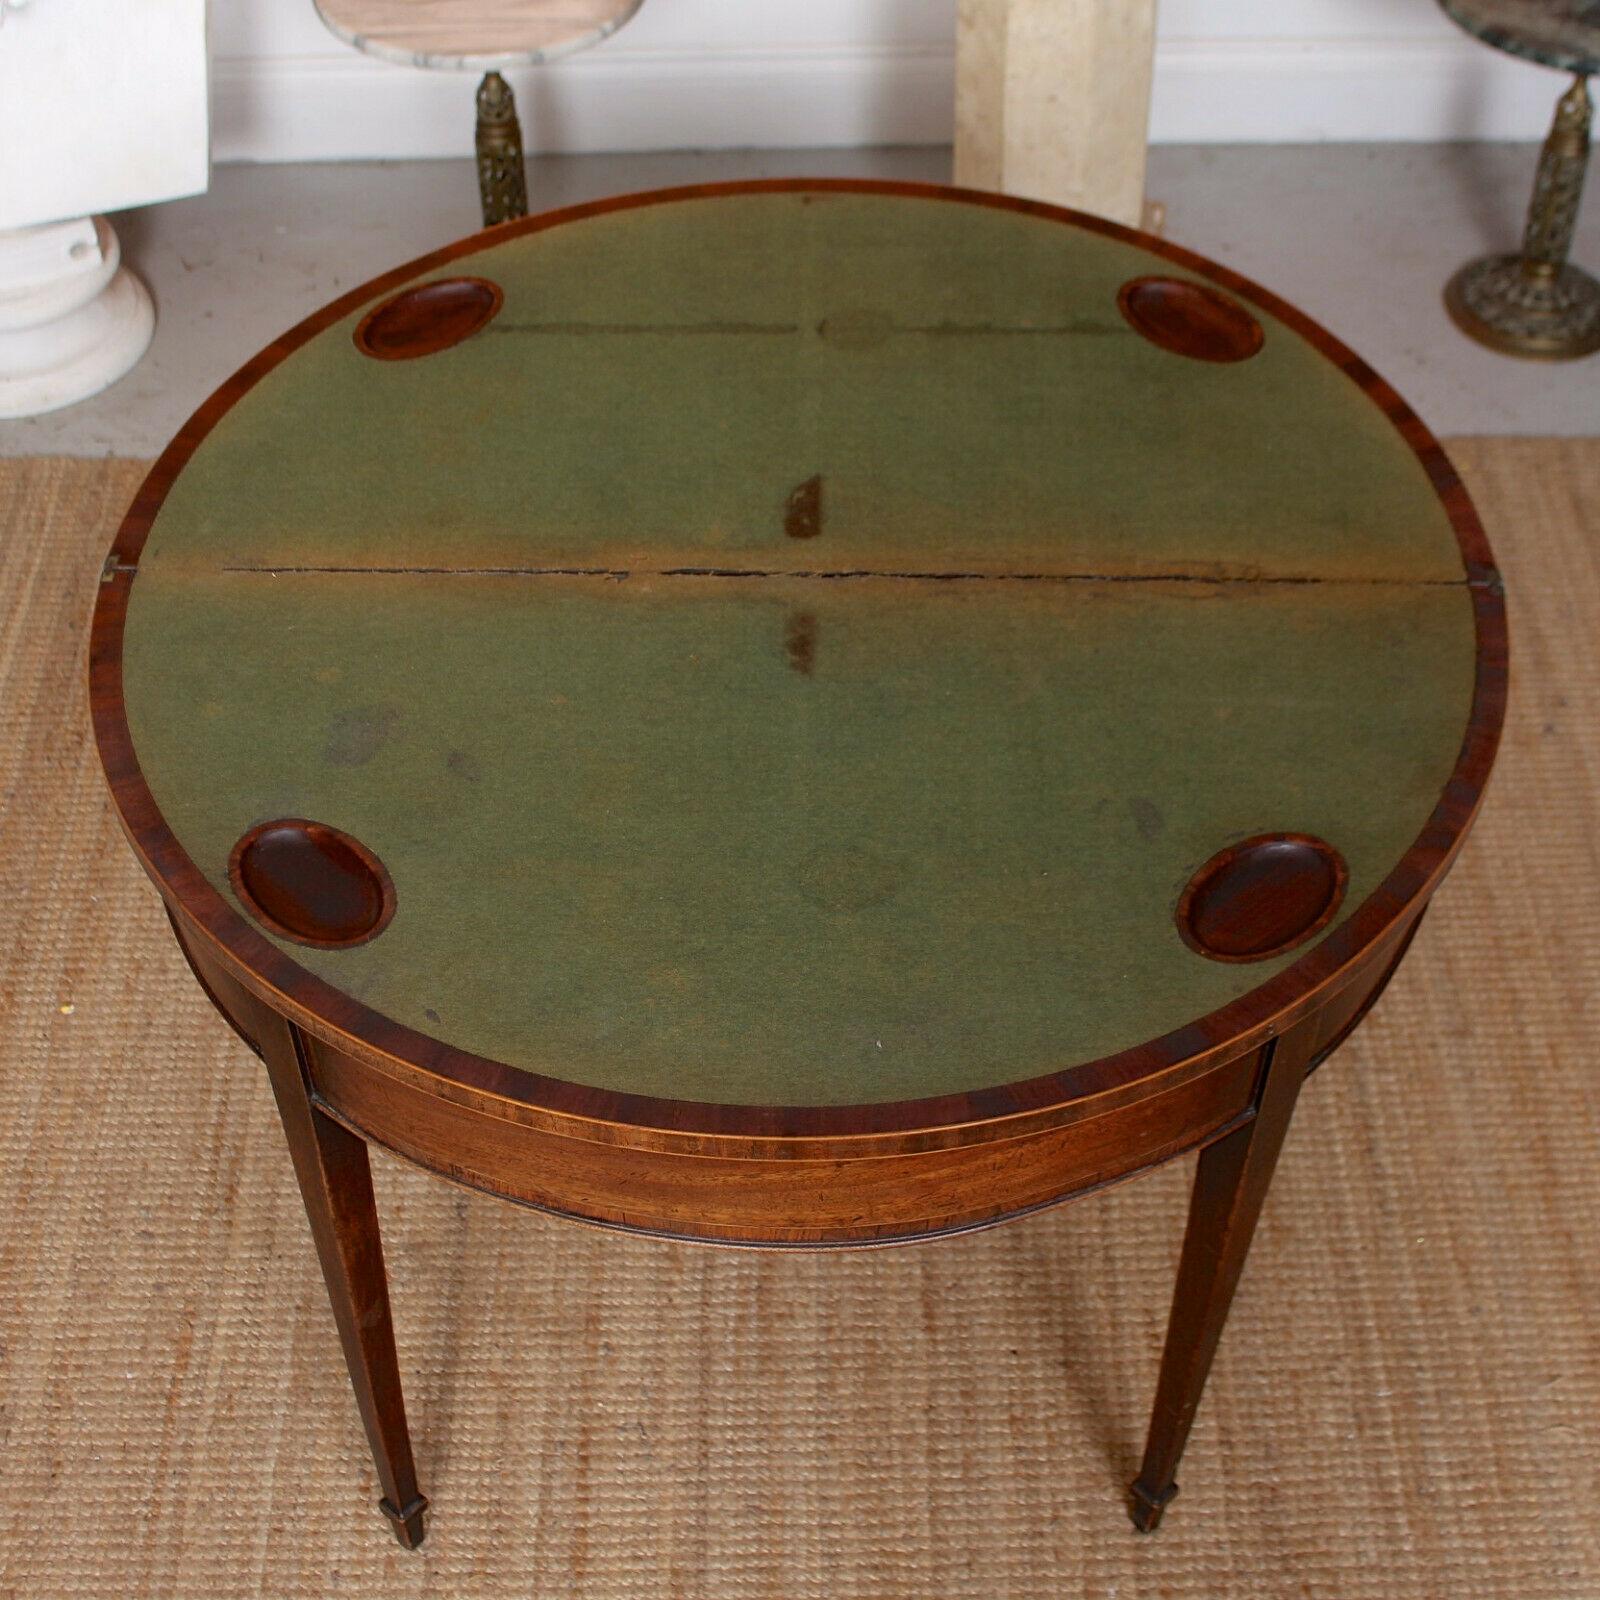 19th Century English Antique Demilune Card Table Victorian Circular Mahogany Folding Console For Sale